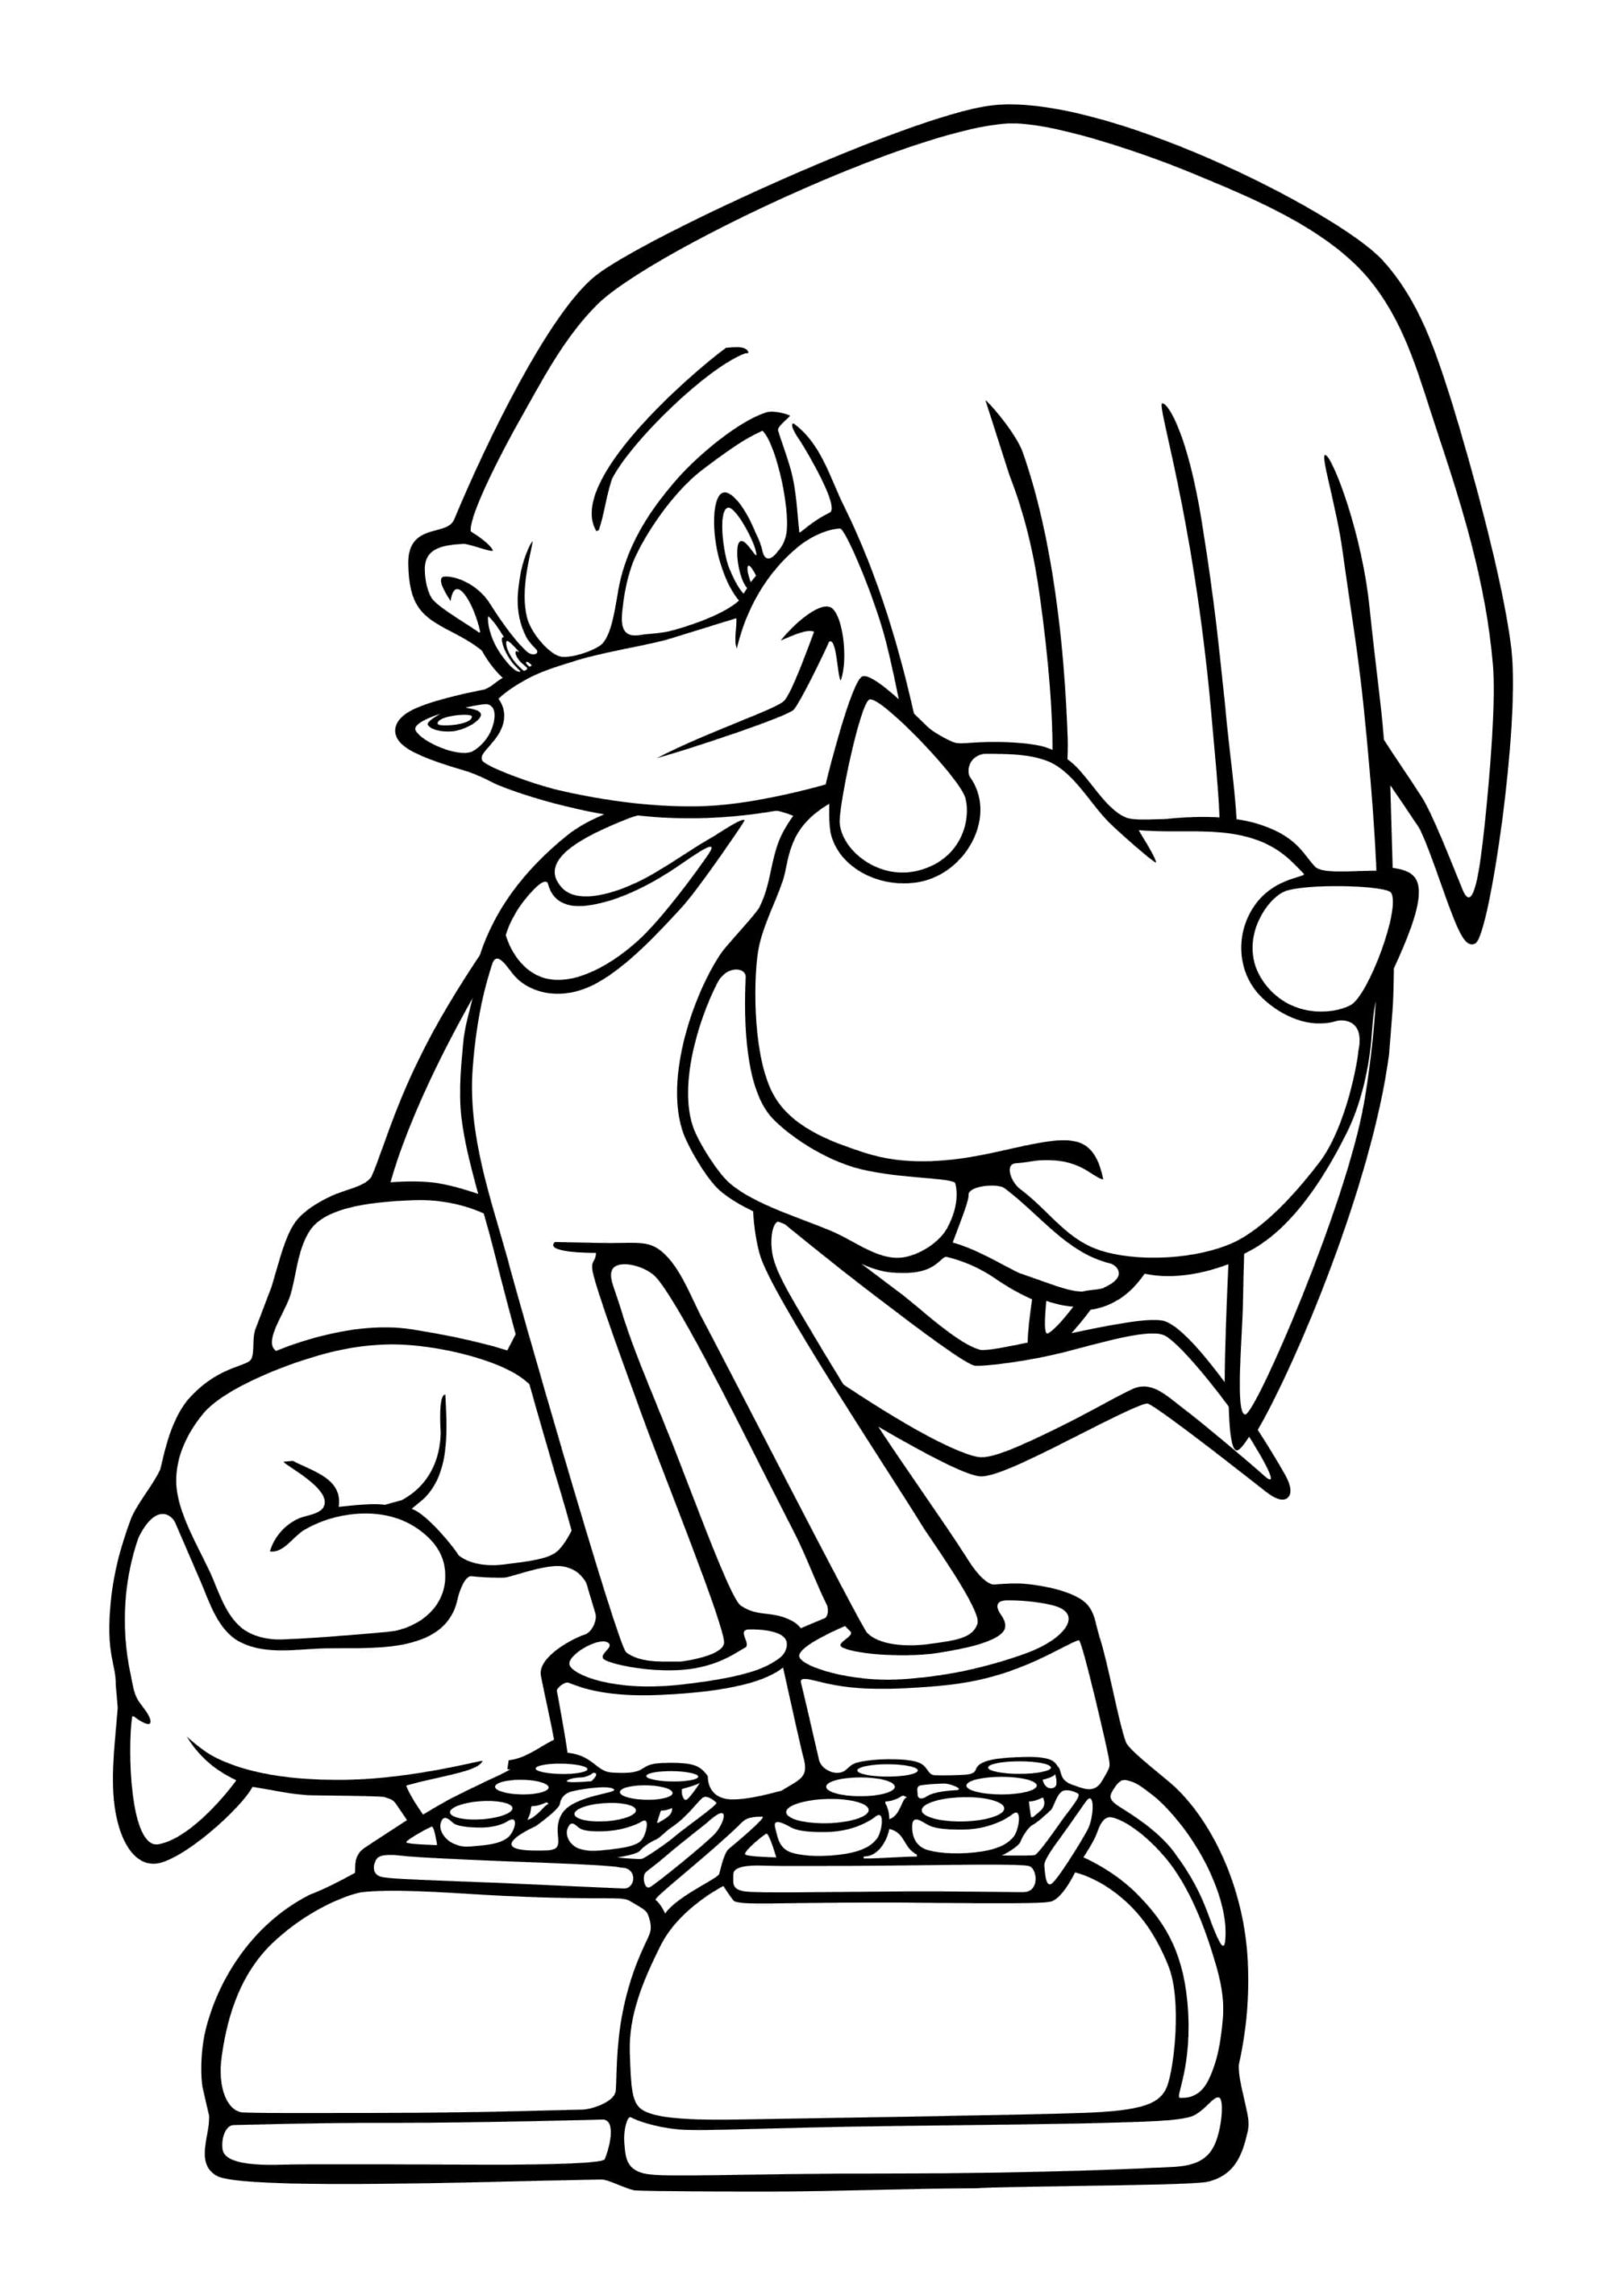 Raskrasil.com-Coloring-Pages-Knuckles-The-Echidna-2